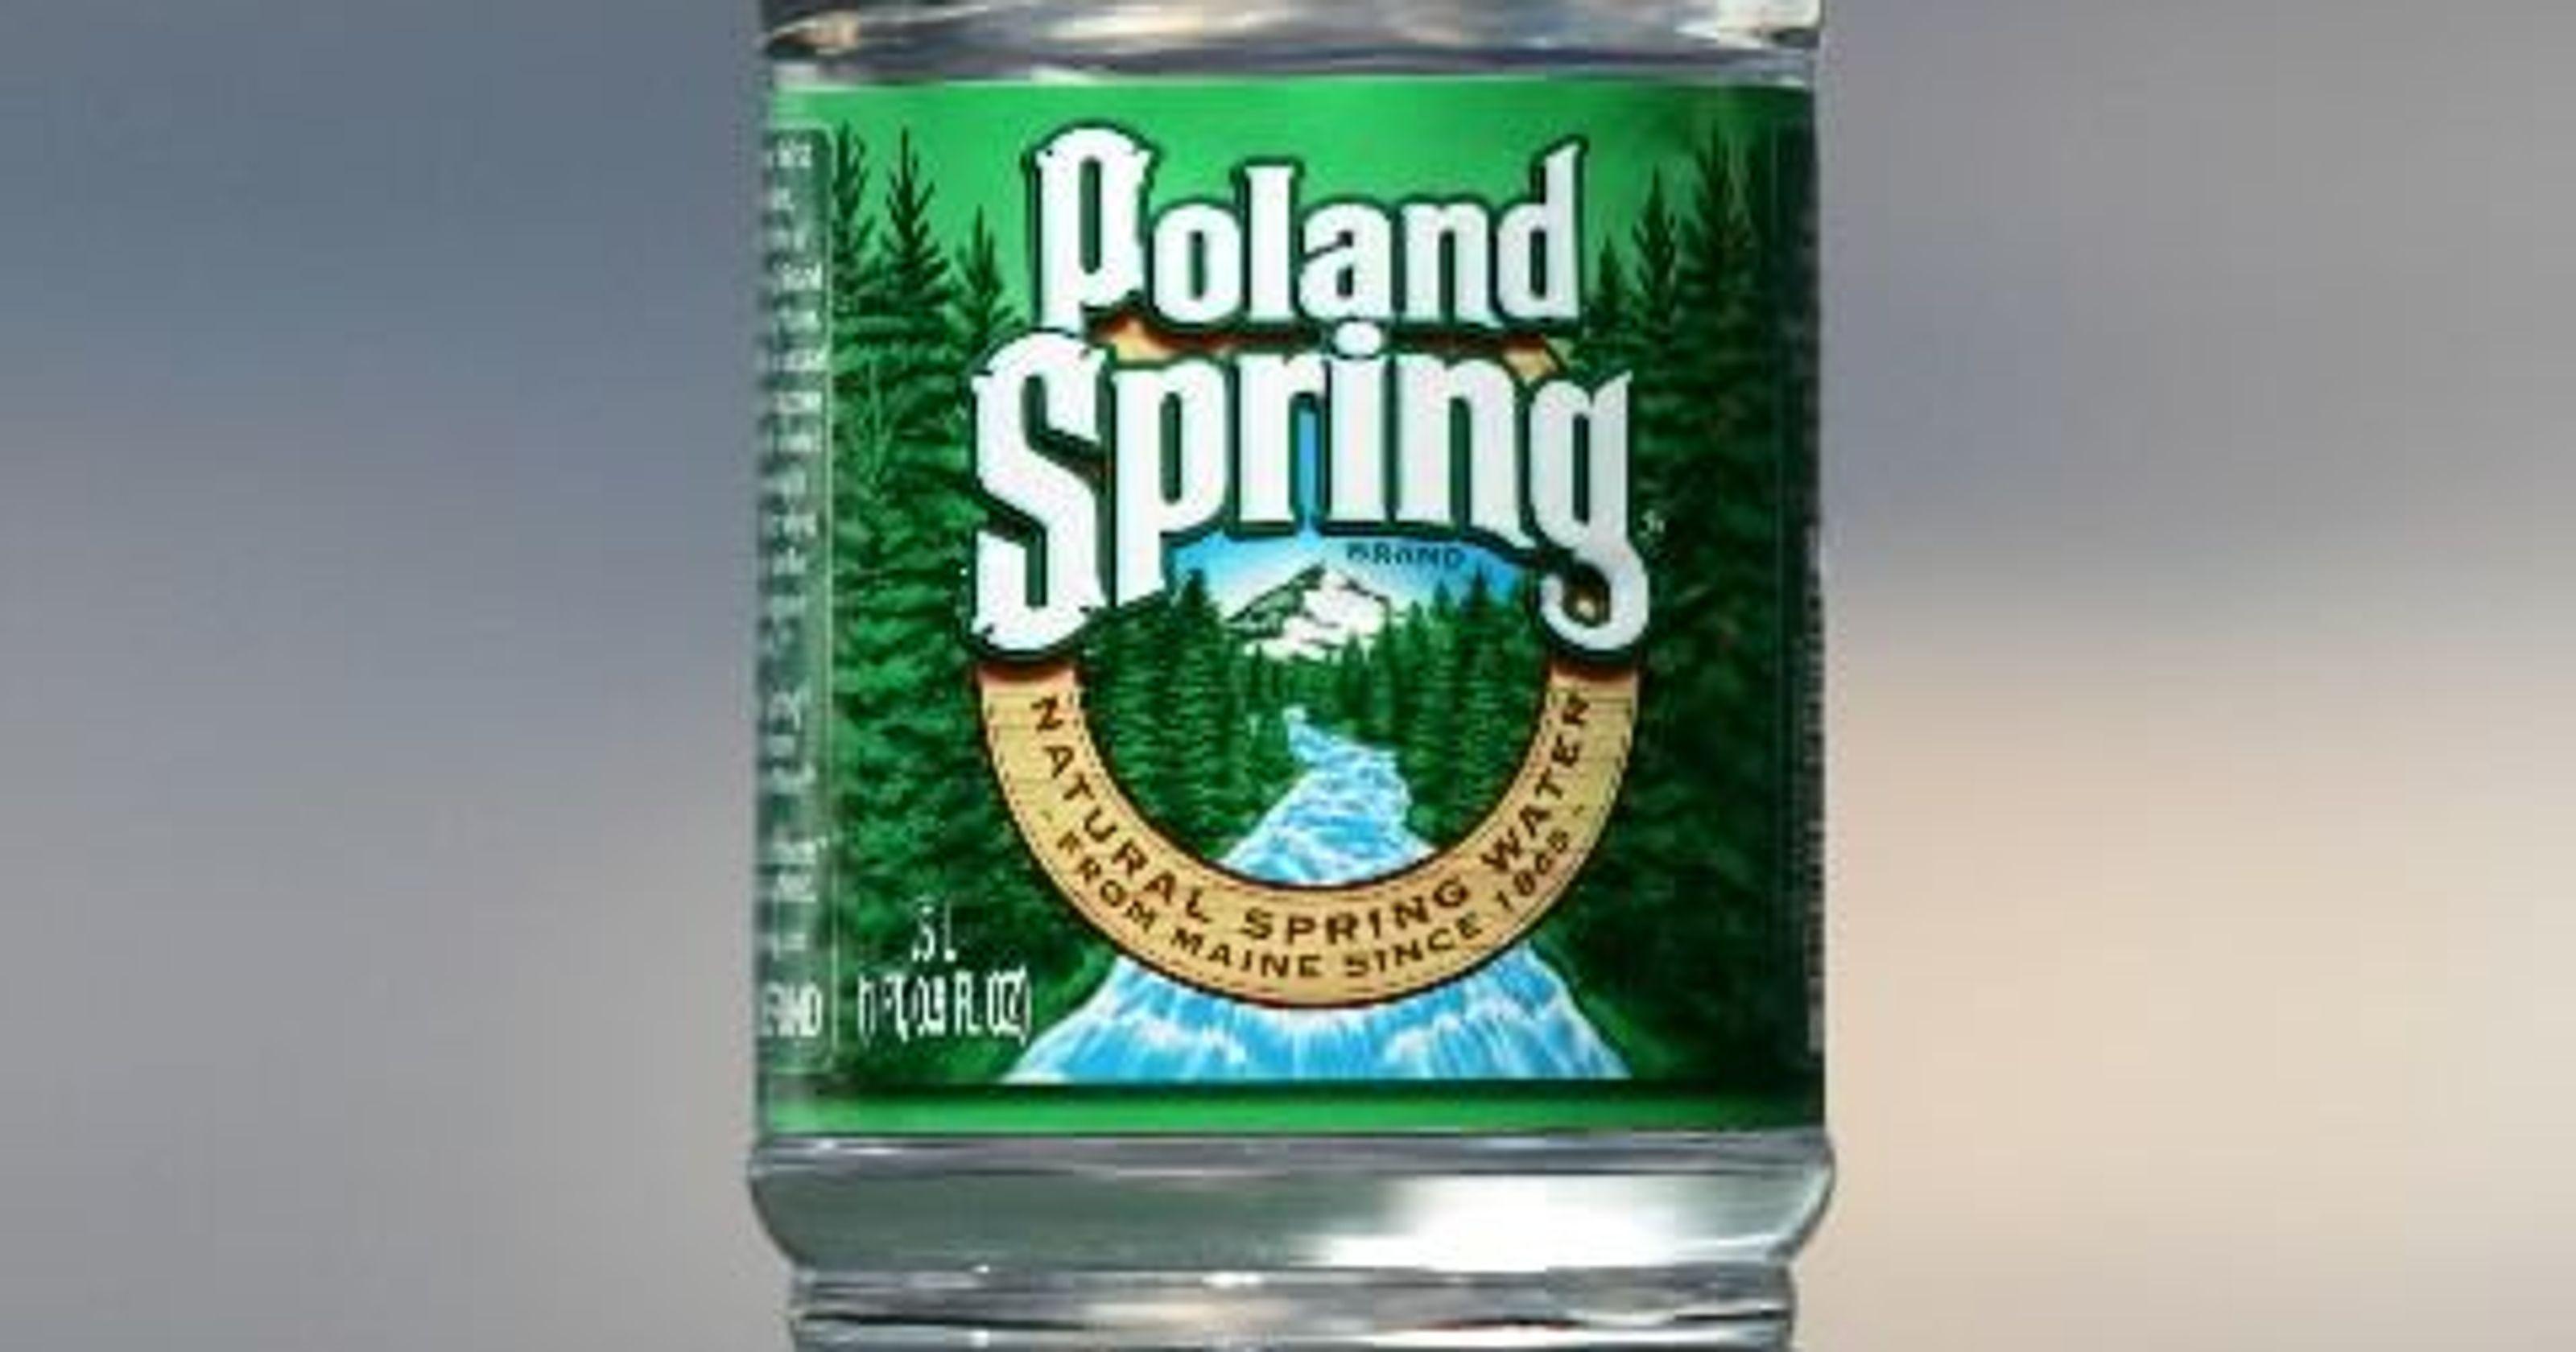 Polar Spring Water Logo - Poland Spring Water in Maine: Lawsuit calls it a 'colossal fraud'